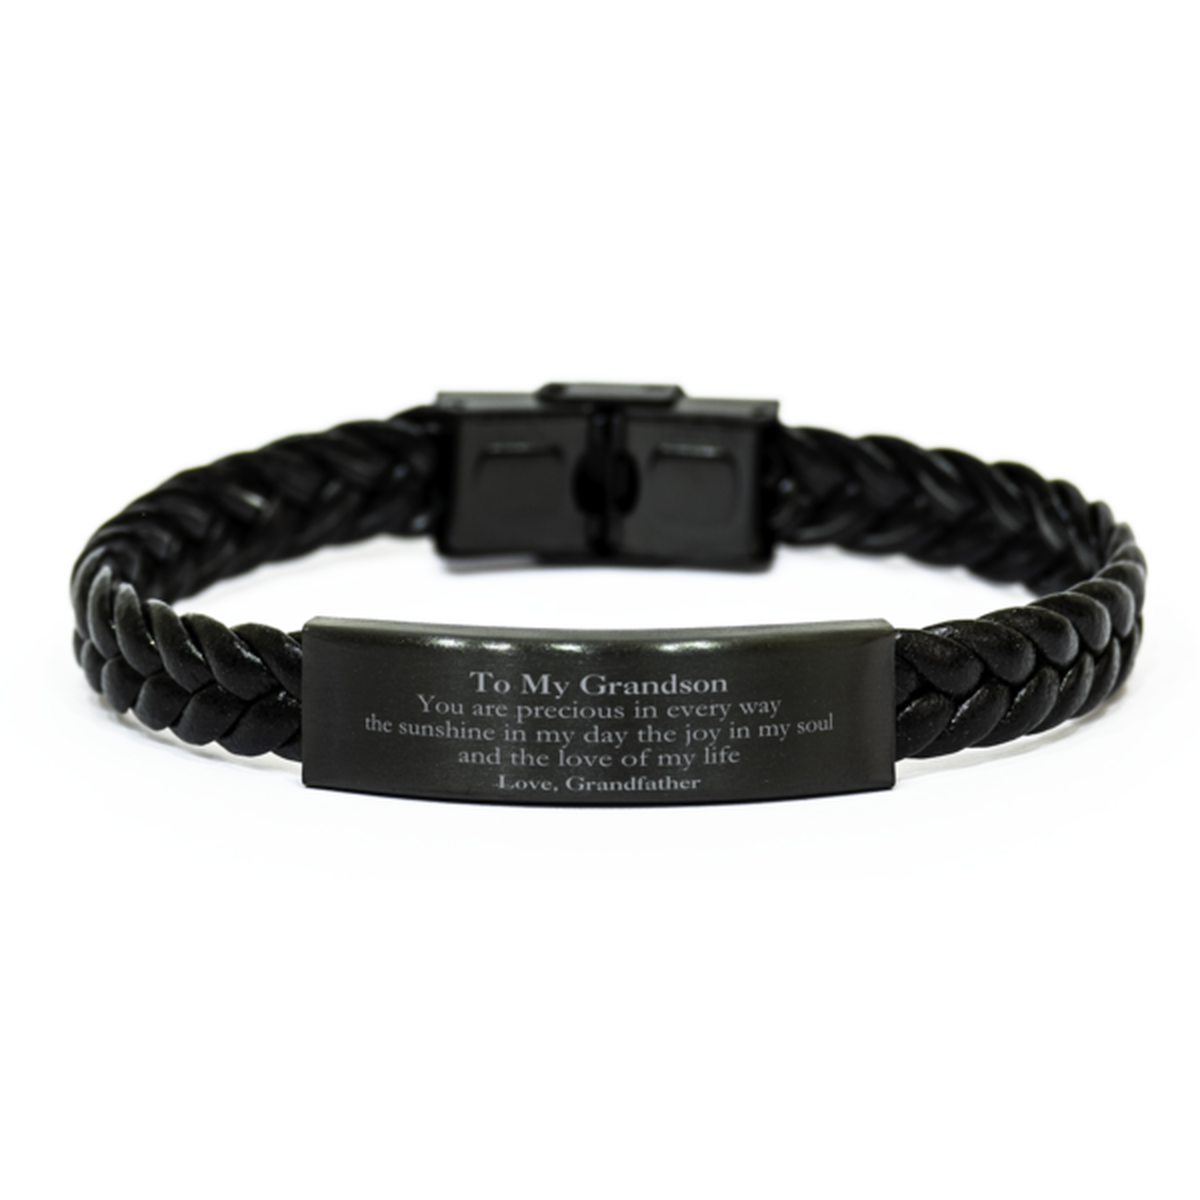 Graduation Gifts for Grandson Braided Leather Bracelet Present from Grandfather, Christmas Grandson Birthday Gifts Grandson You are precious in every way the sunshine in my day. Love, Grandfather